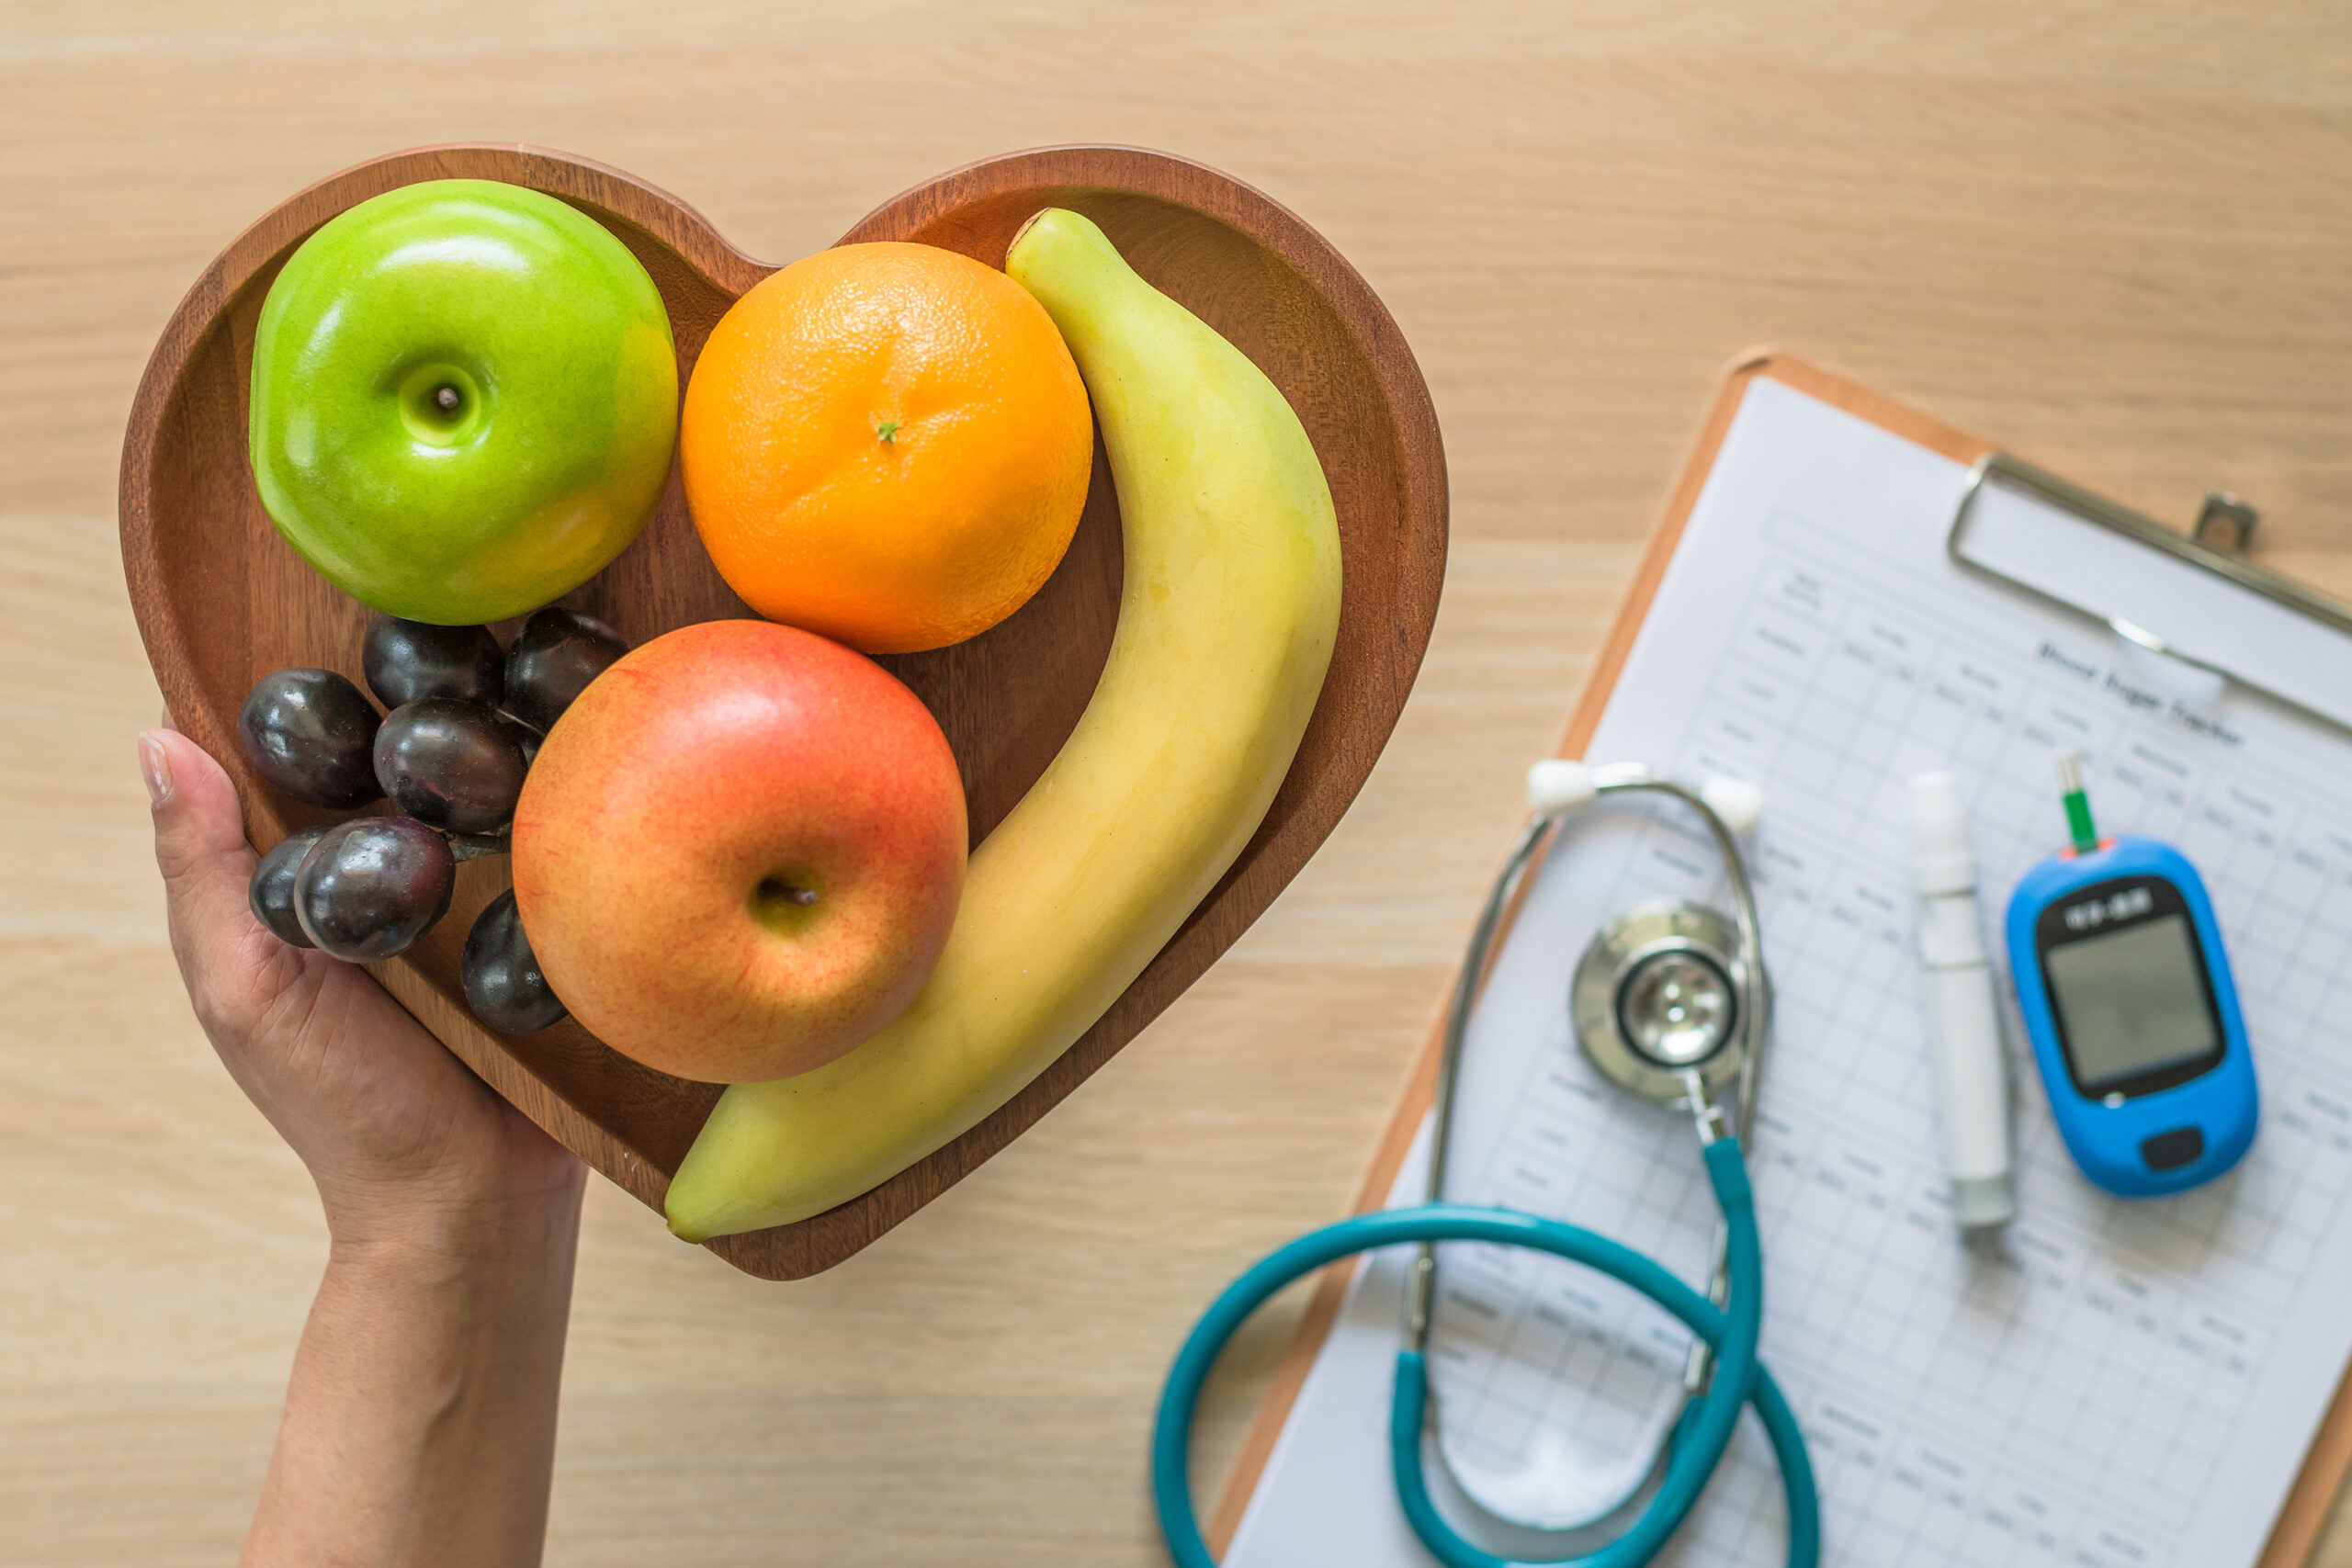 A person holding a heart-shaped wooden bowl filled with colorful fruits including green and red apples, an orange, grapes, and a banana, with a stethoscope and glucose meter in the background.